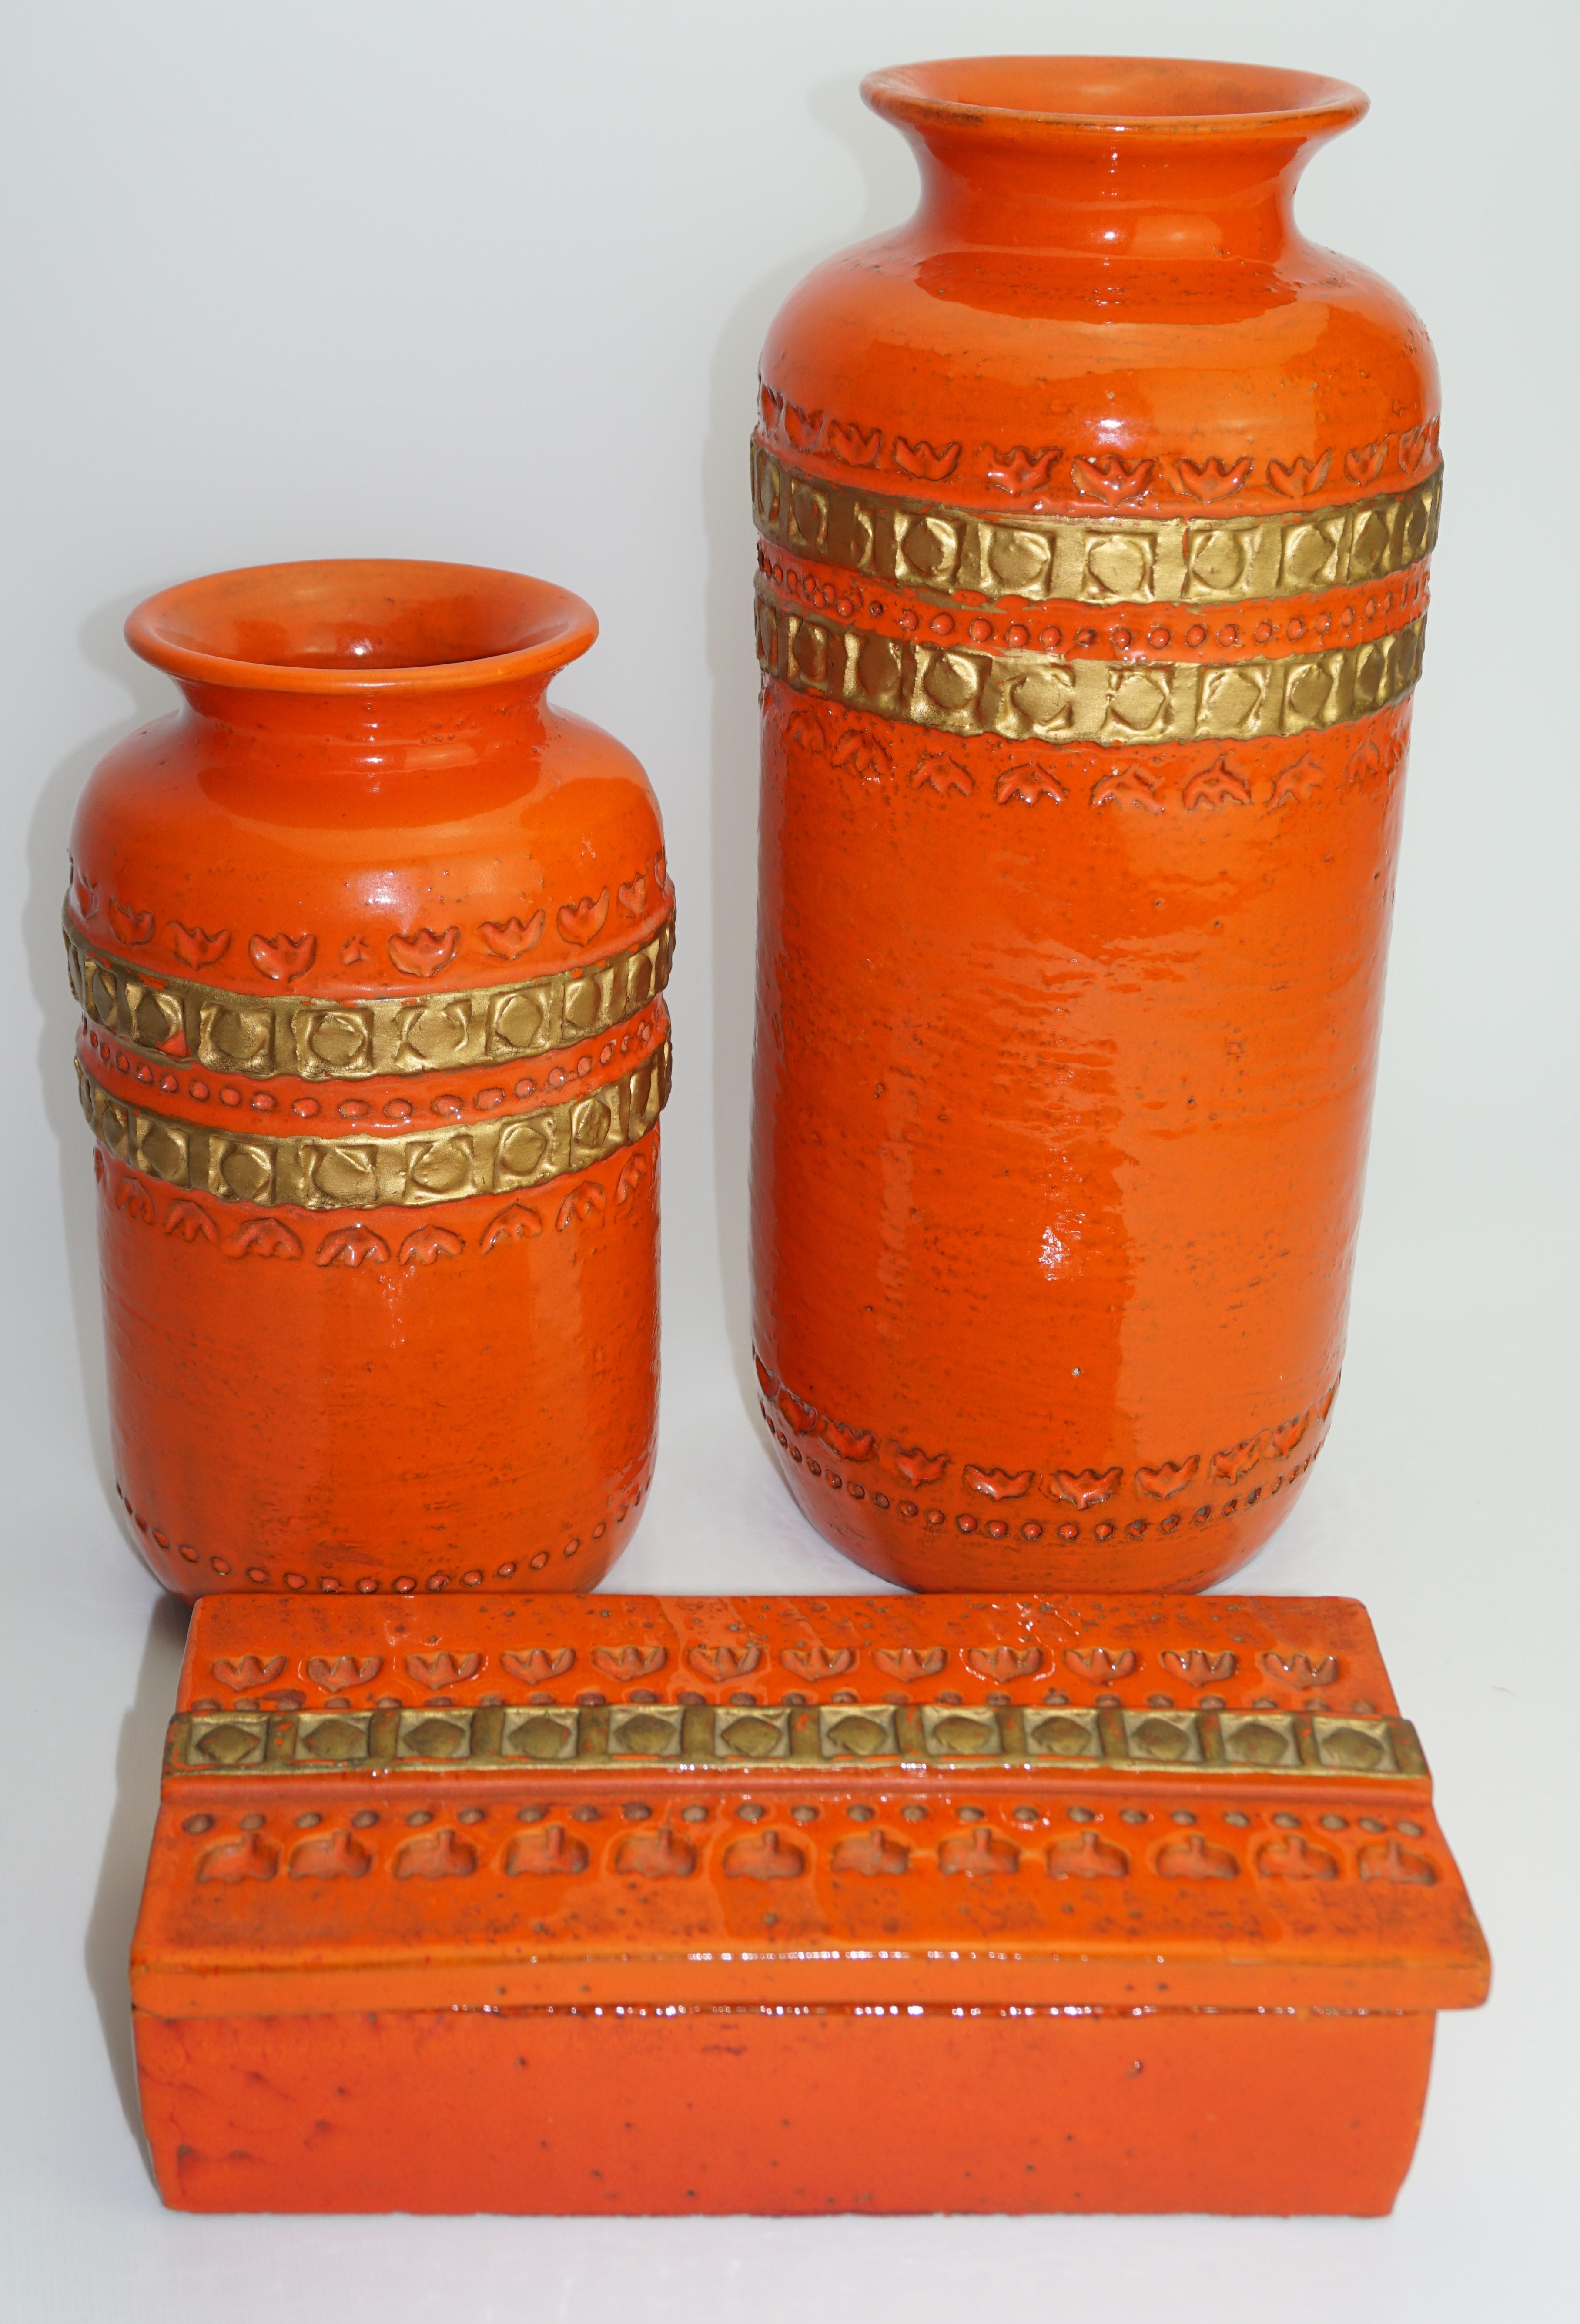 Ceramic Vase by Aldo Londi Bitossi, Orange with Gold Decoration, Italy, C 1960 In Good Condition For Sale In New York, NY